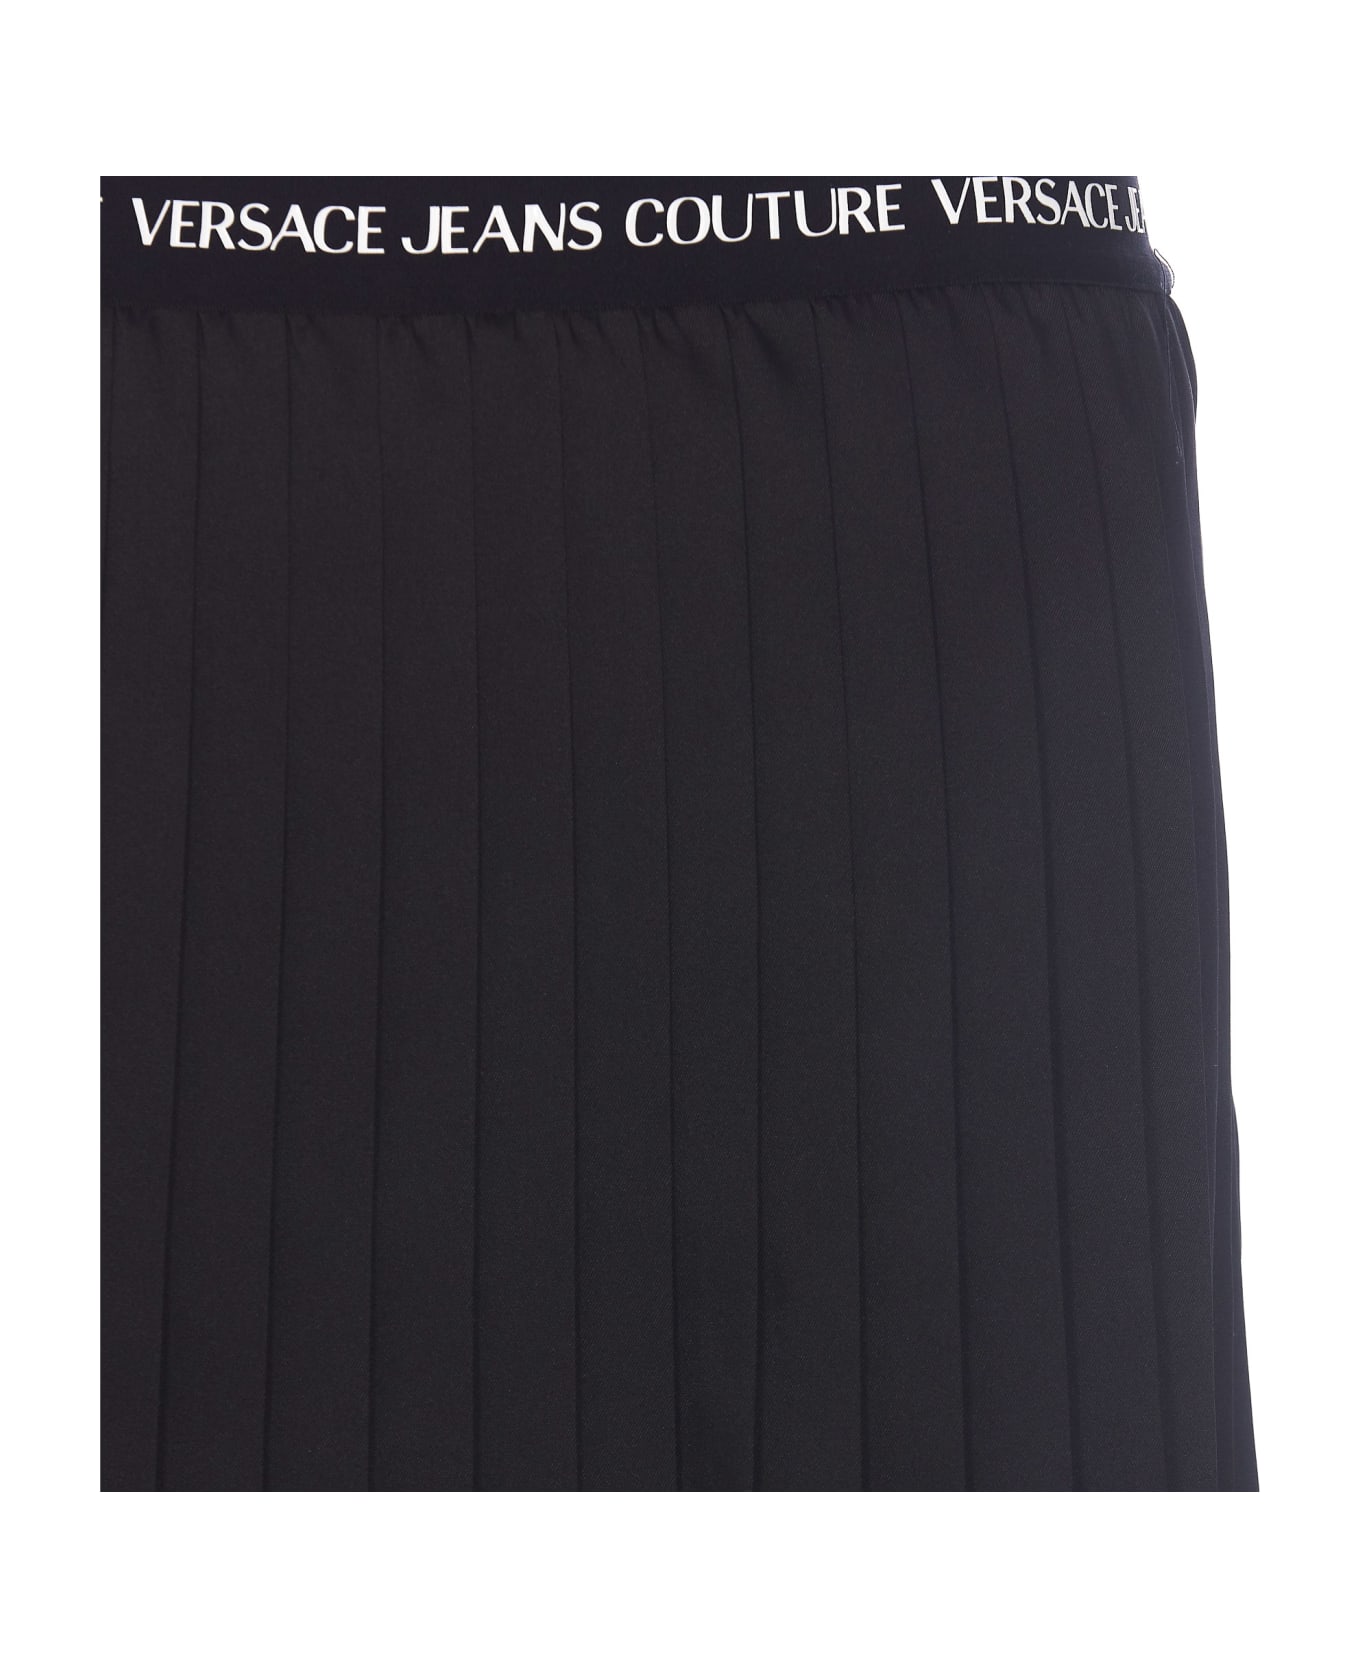 Versace Jeans Couture Leggings - 899 レギンス